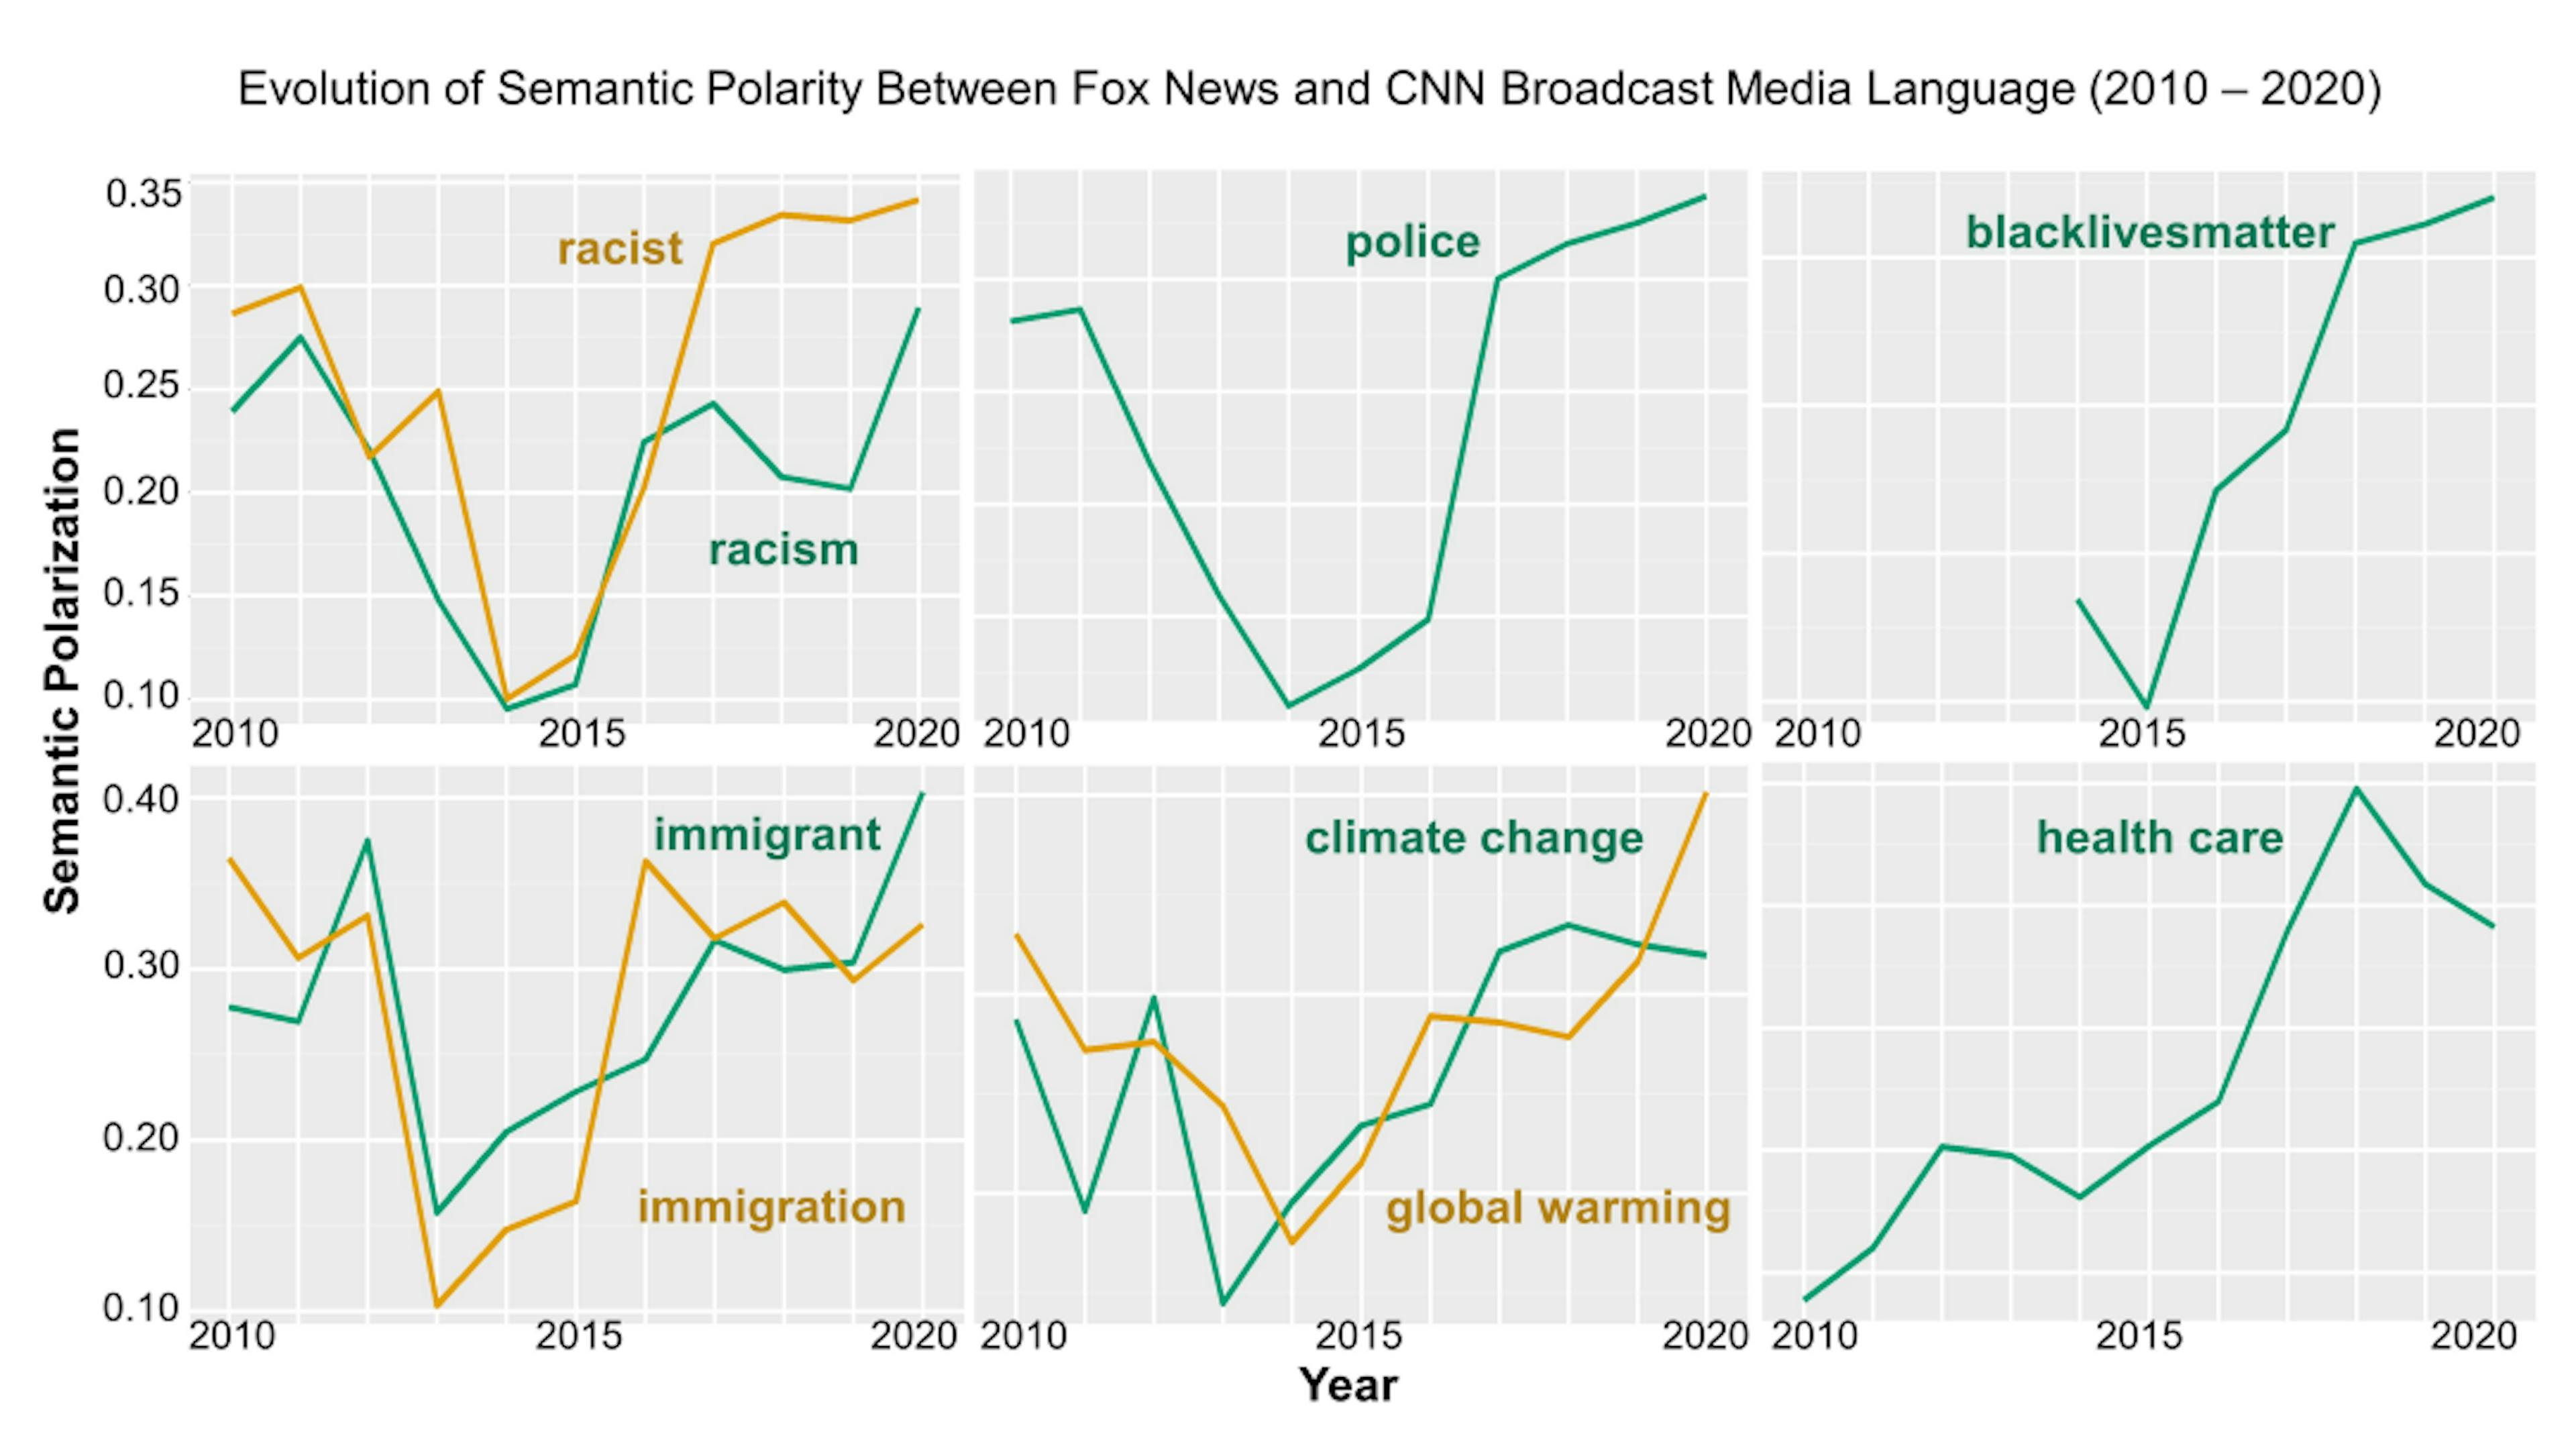 Figure 3: Evolution of semantic polarization in how CNN and Fox News use topically contentious keywords from 2010 to 2020.